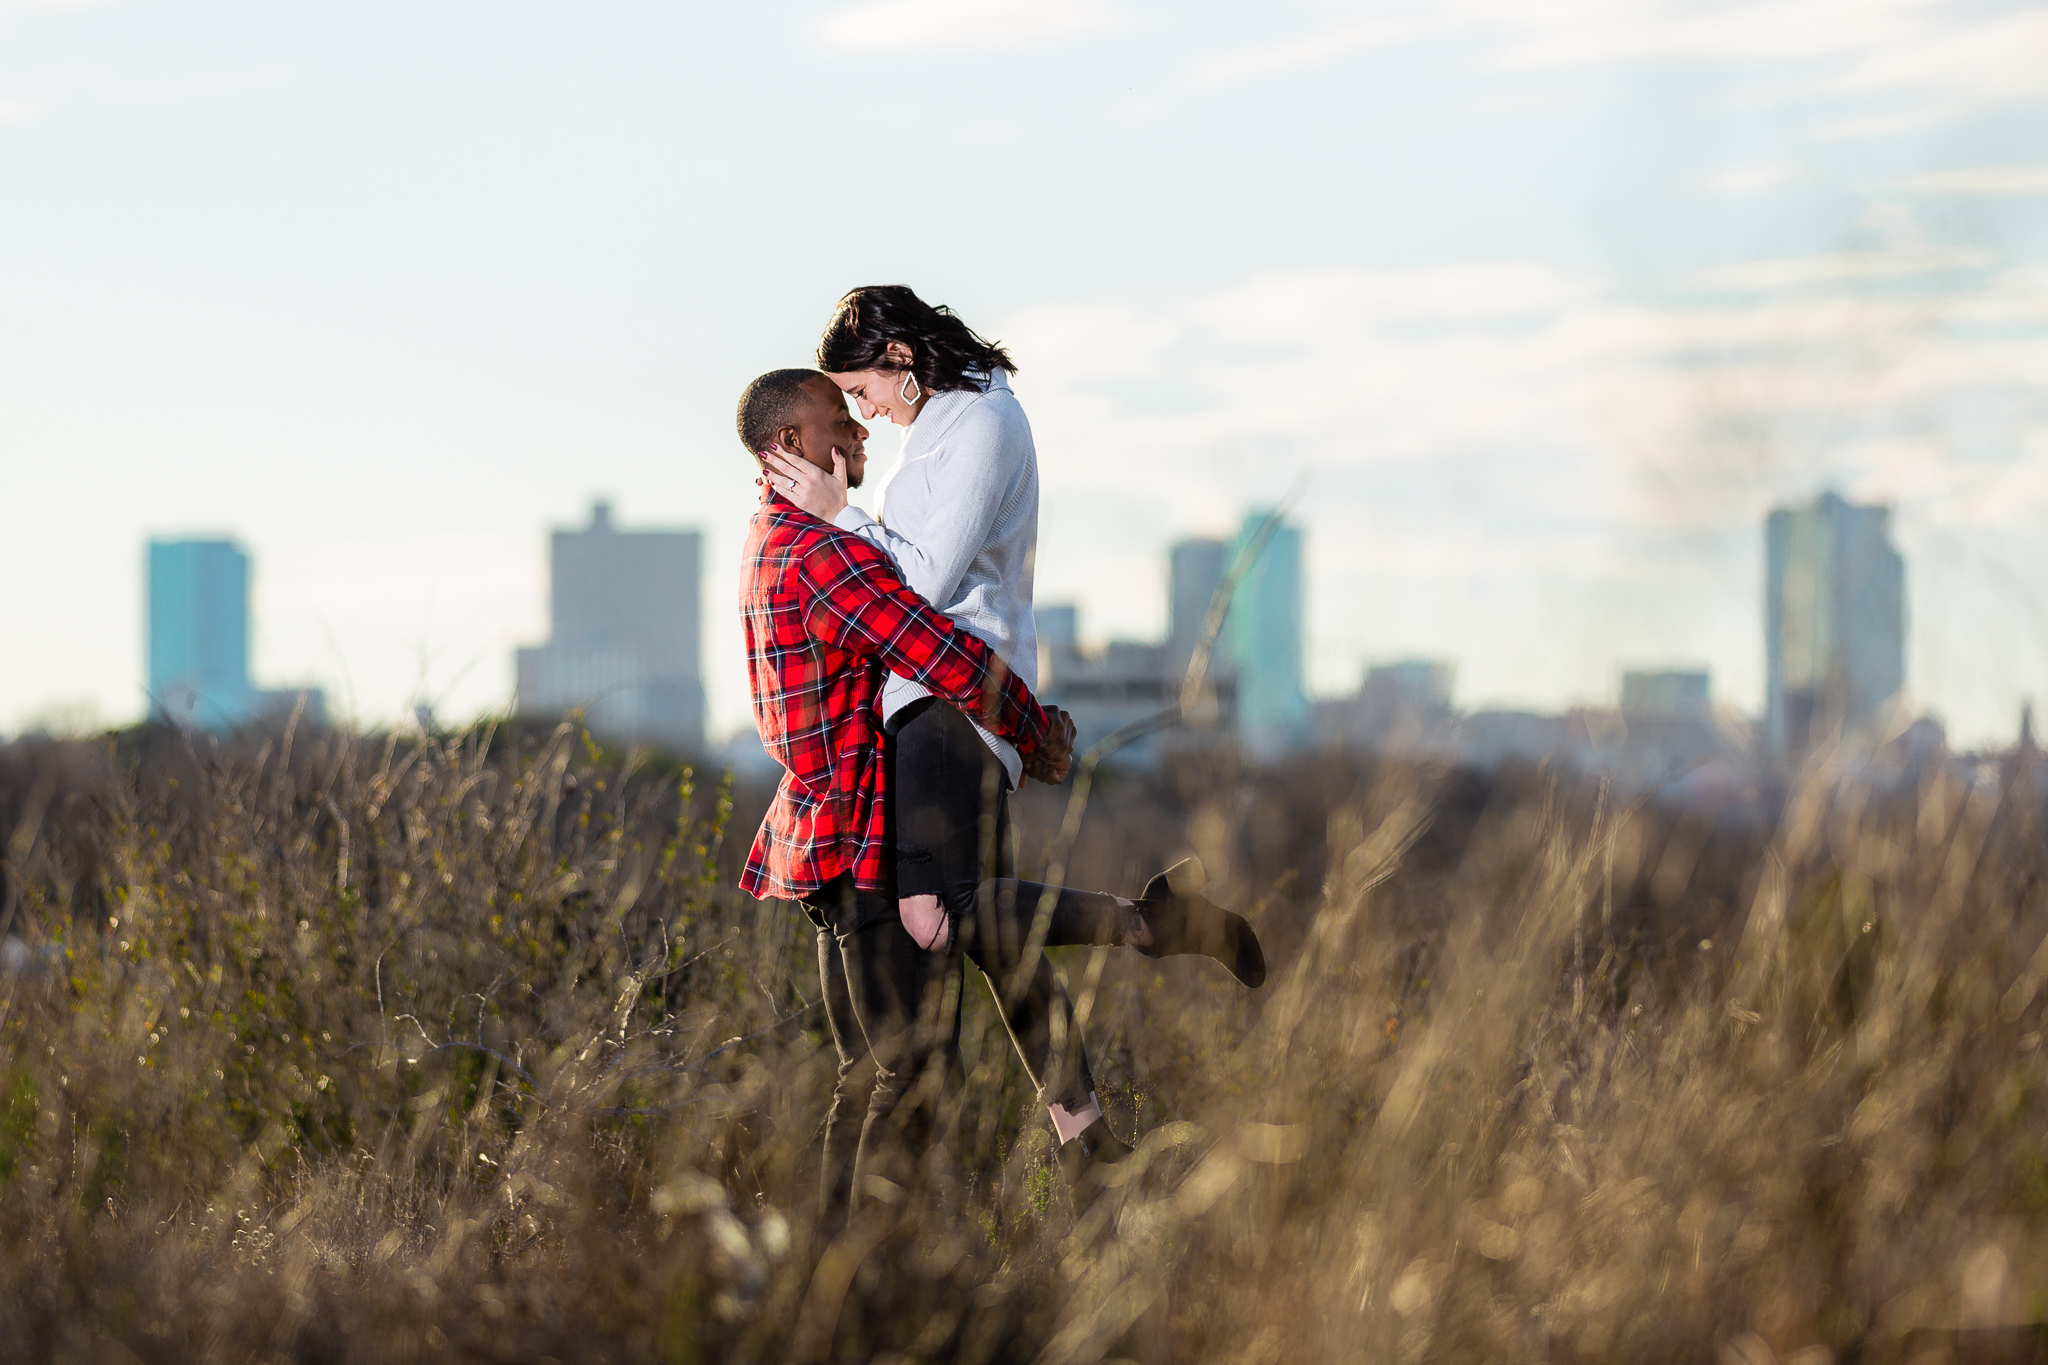 Tandy Hills Natural Area Engagement Photoshoot with Fort Worth skyline in background